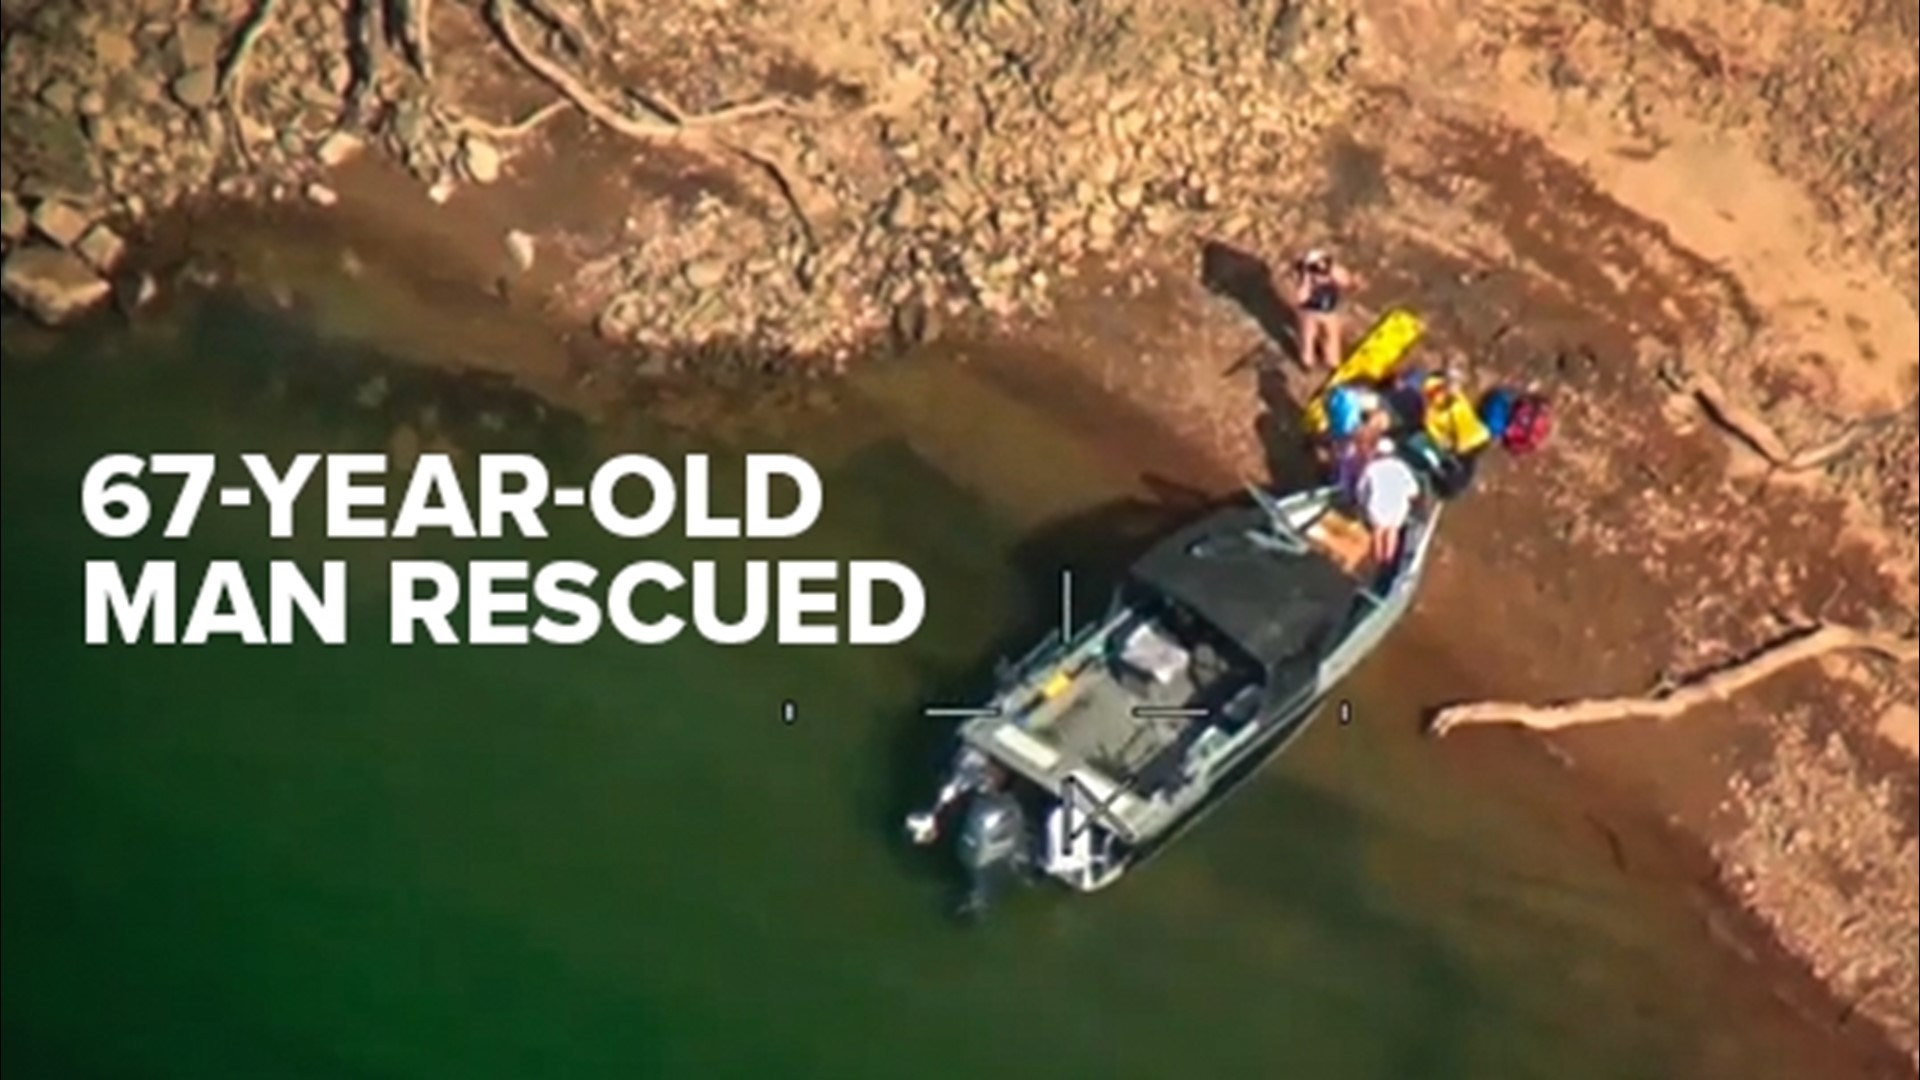 A 67-year-old man who reportedly fell overboard at Union Valley Reservoir on Wednesday was saved by El Dorado County Fire Protection District and CHP personnel.